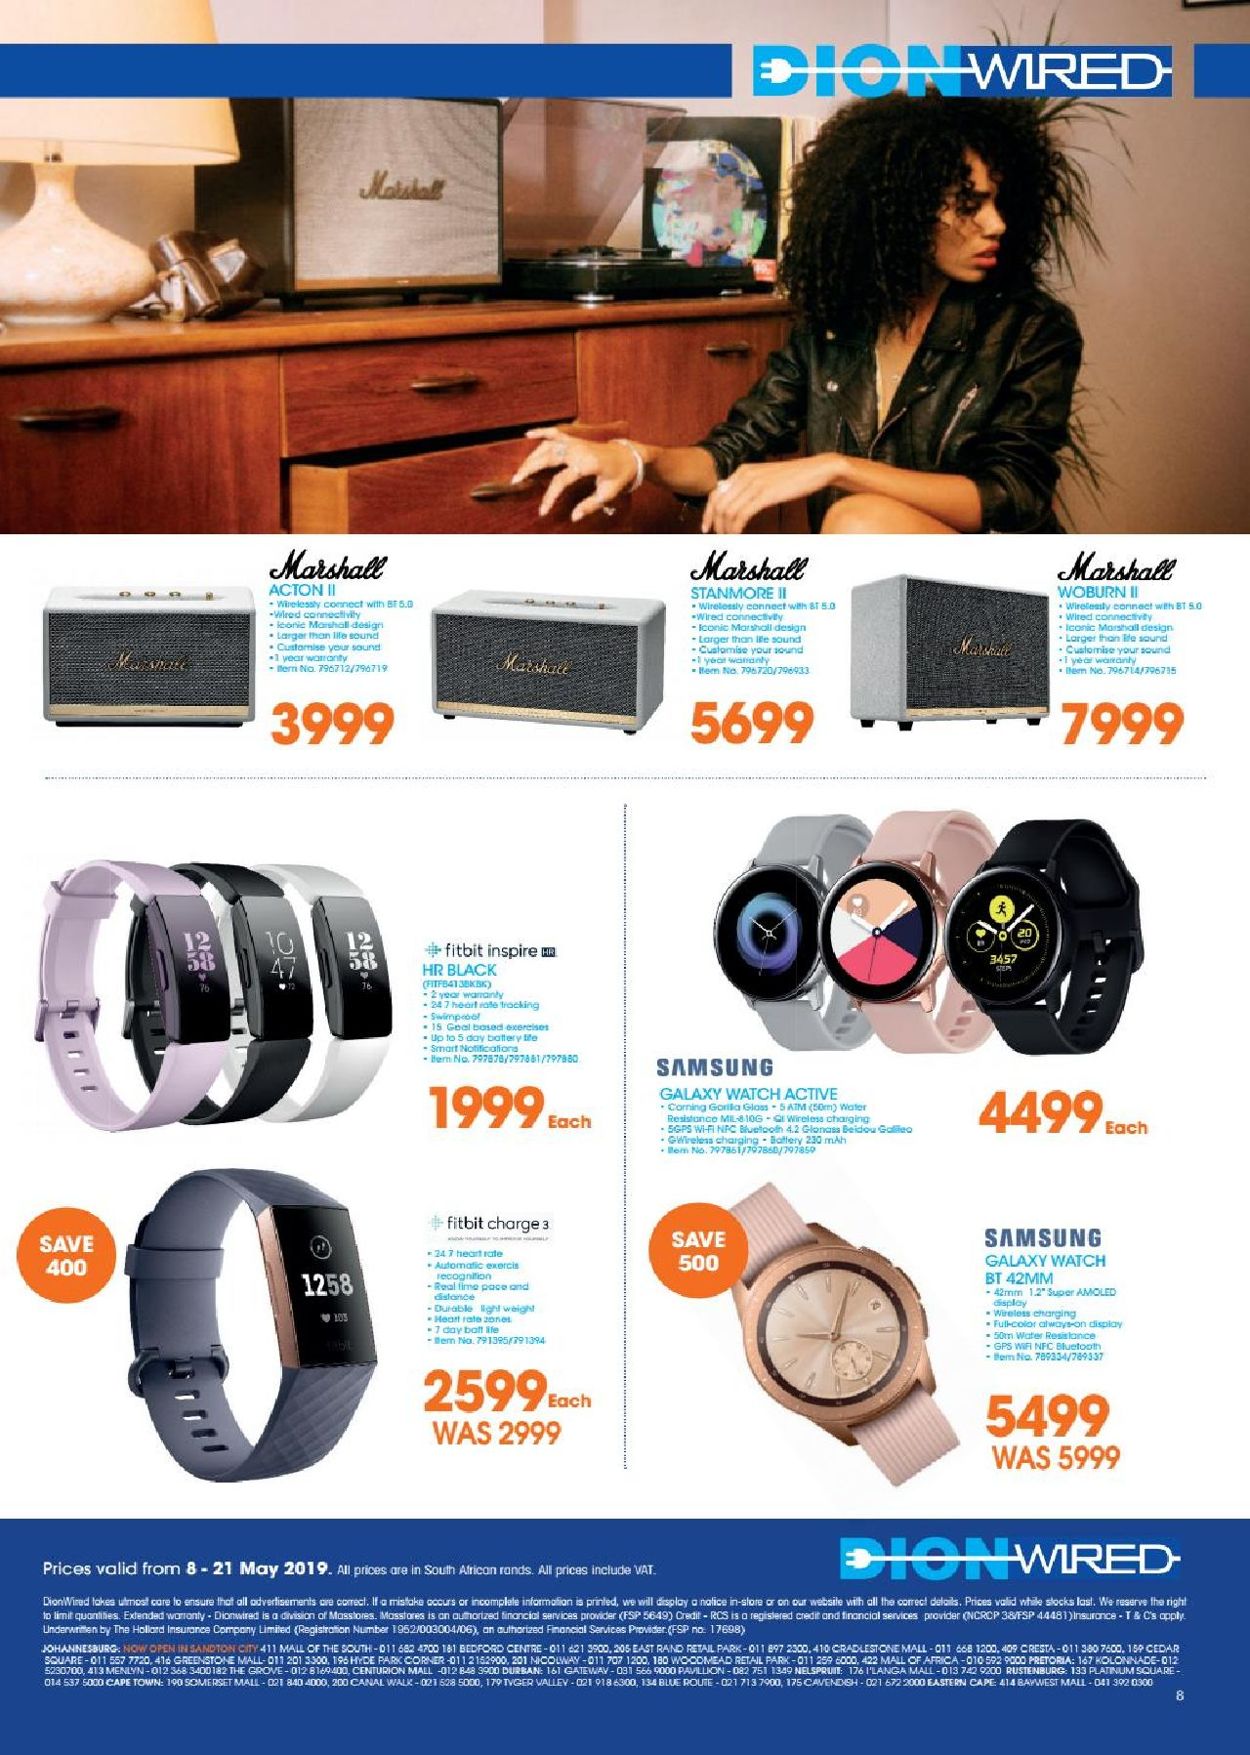 Dion Wired Catalogue - 2019/05/08-2019/05/21 (Page 8)